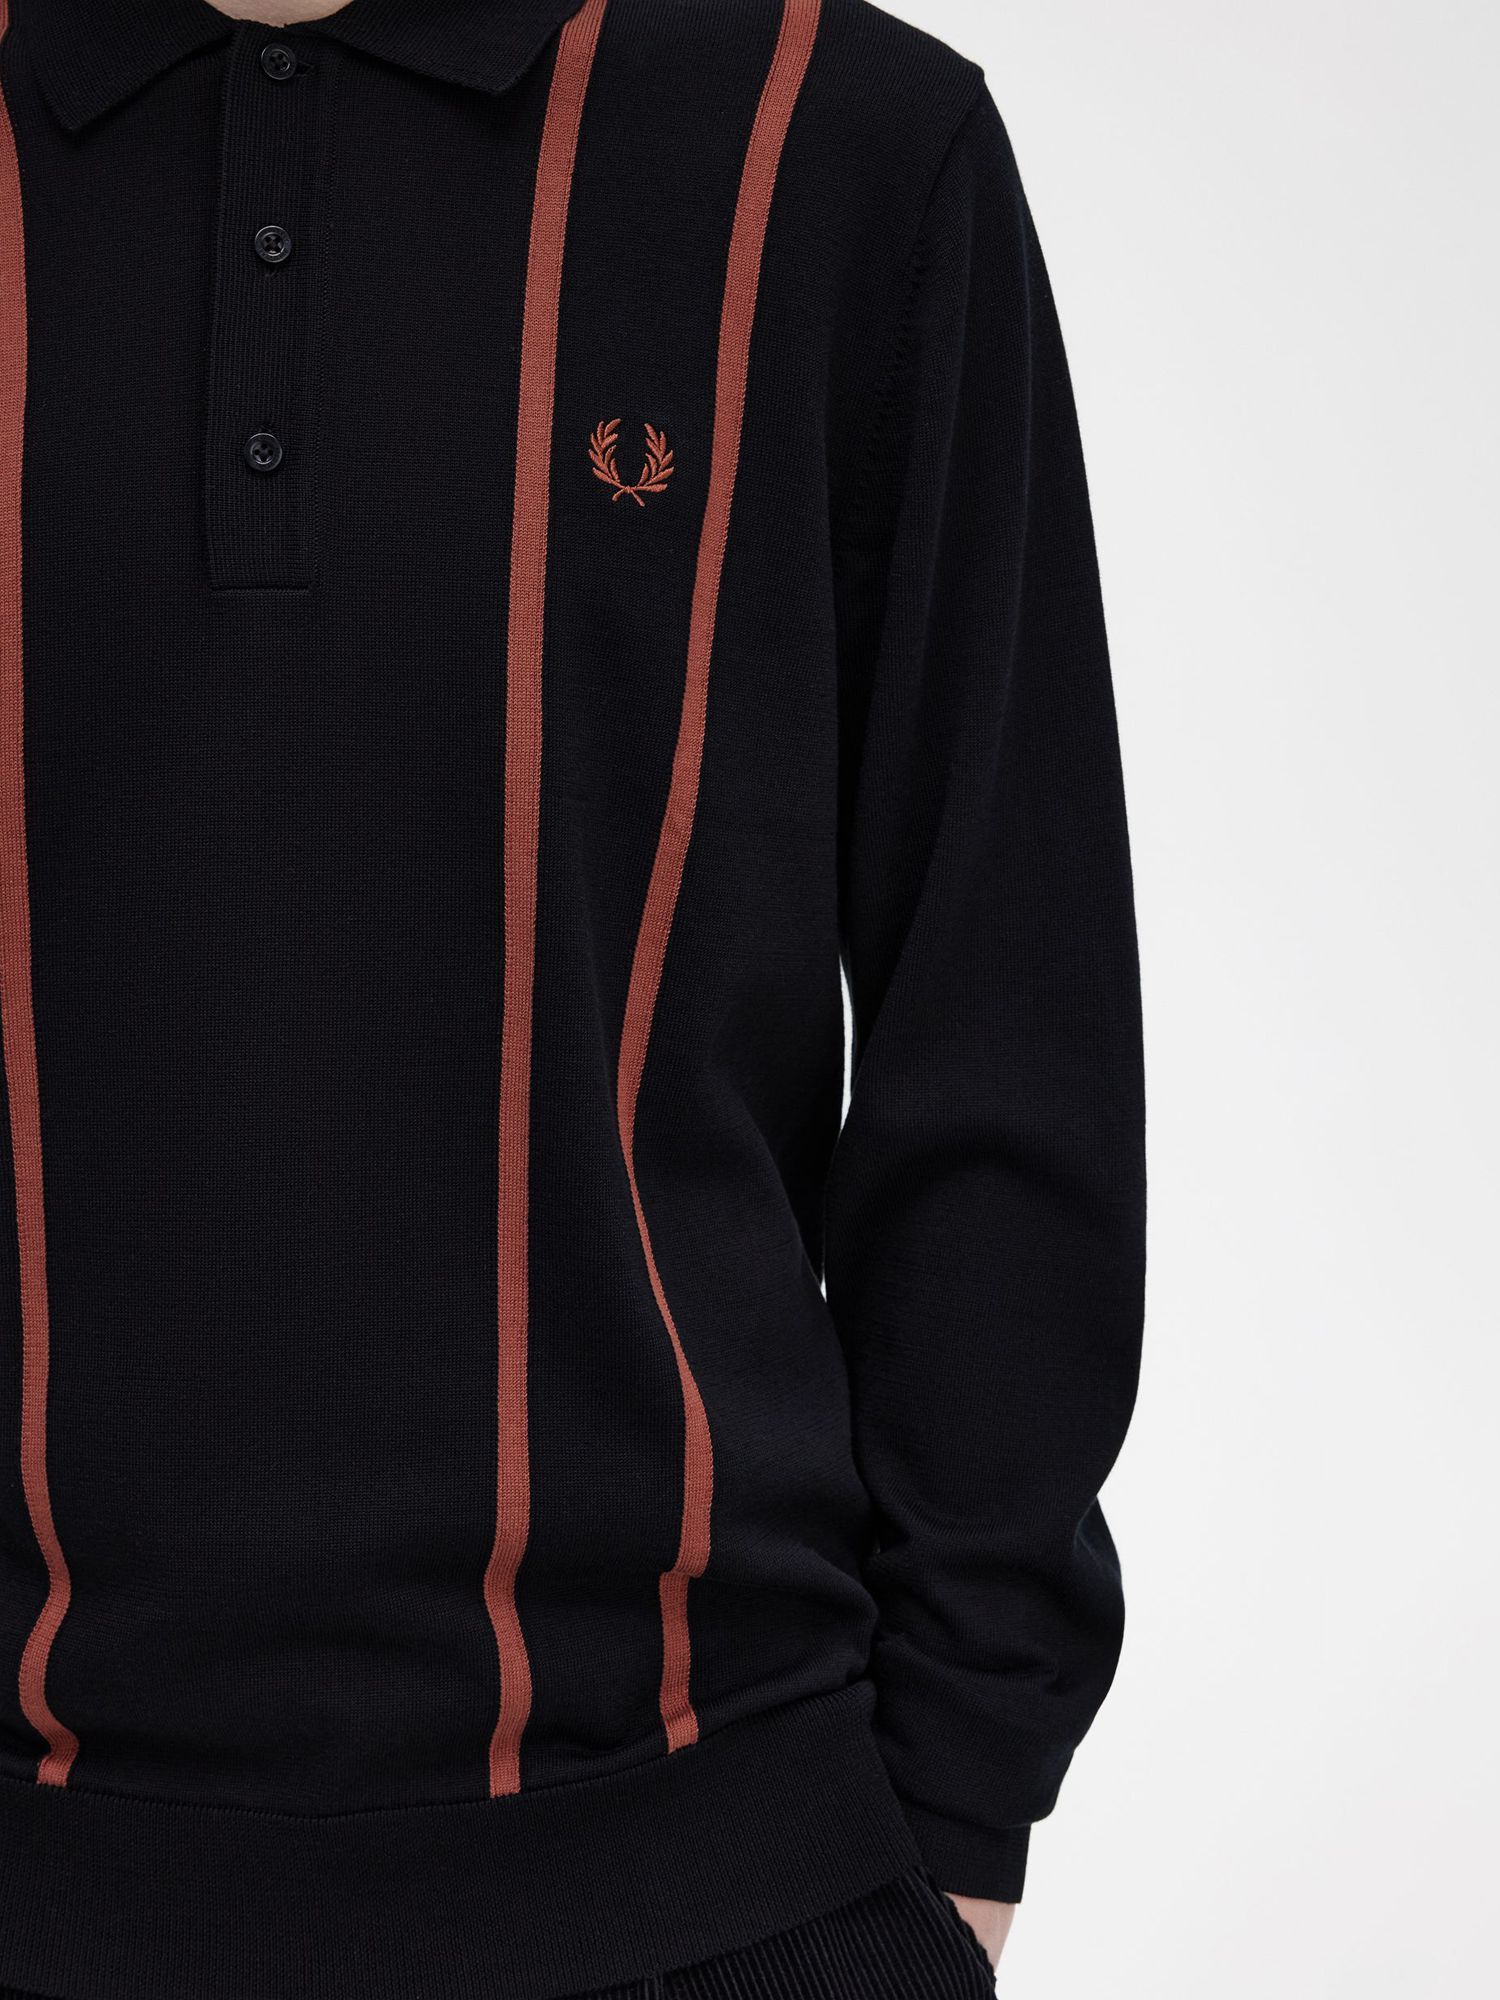 Fred Perry Textured Knit Long Sleeve Polo Shirt, Black/Red, XL